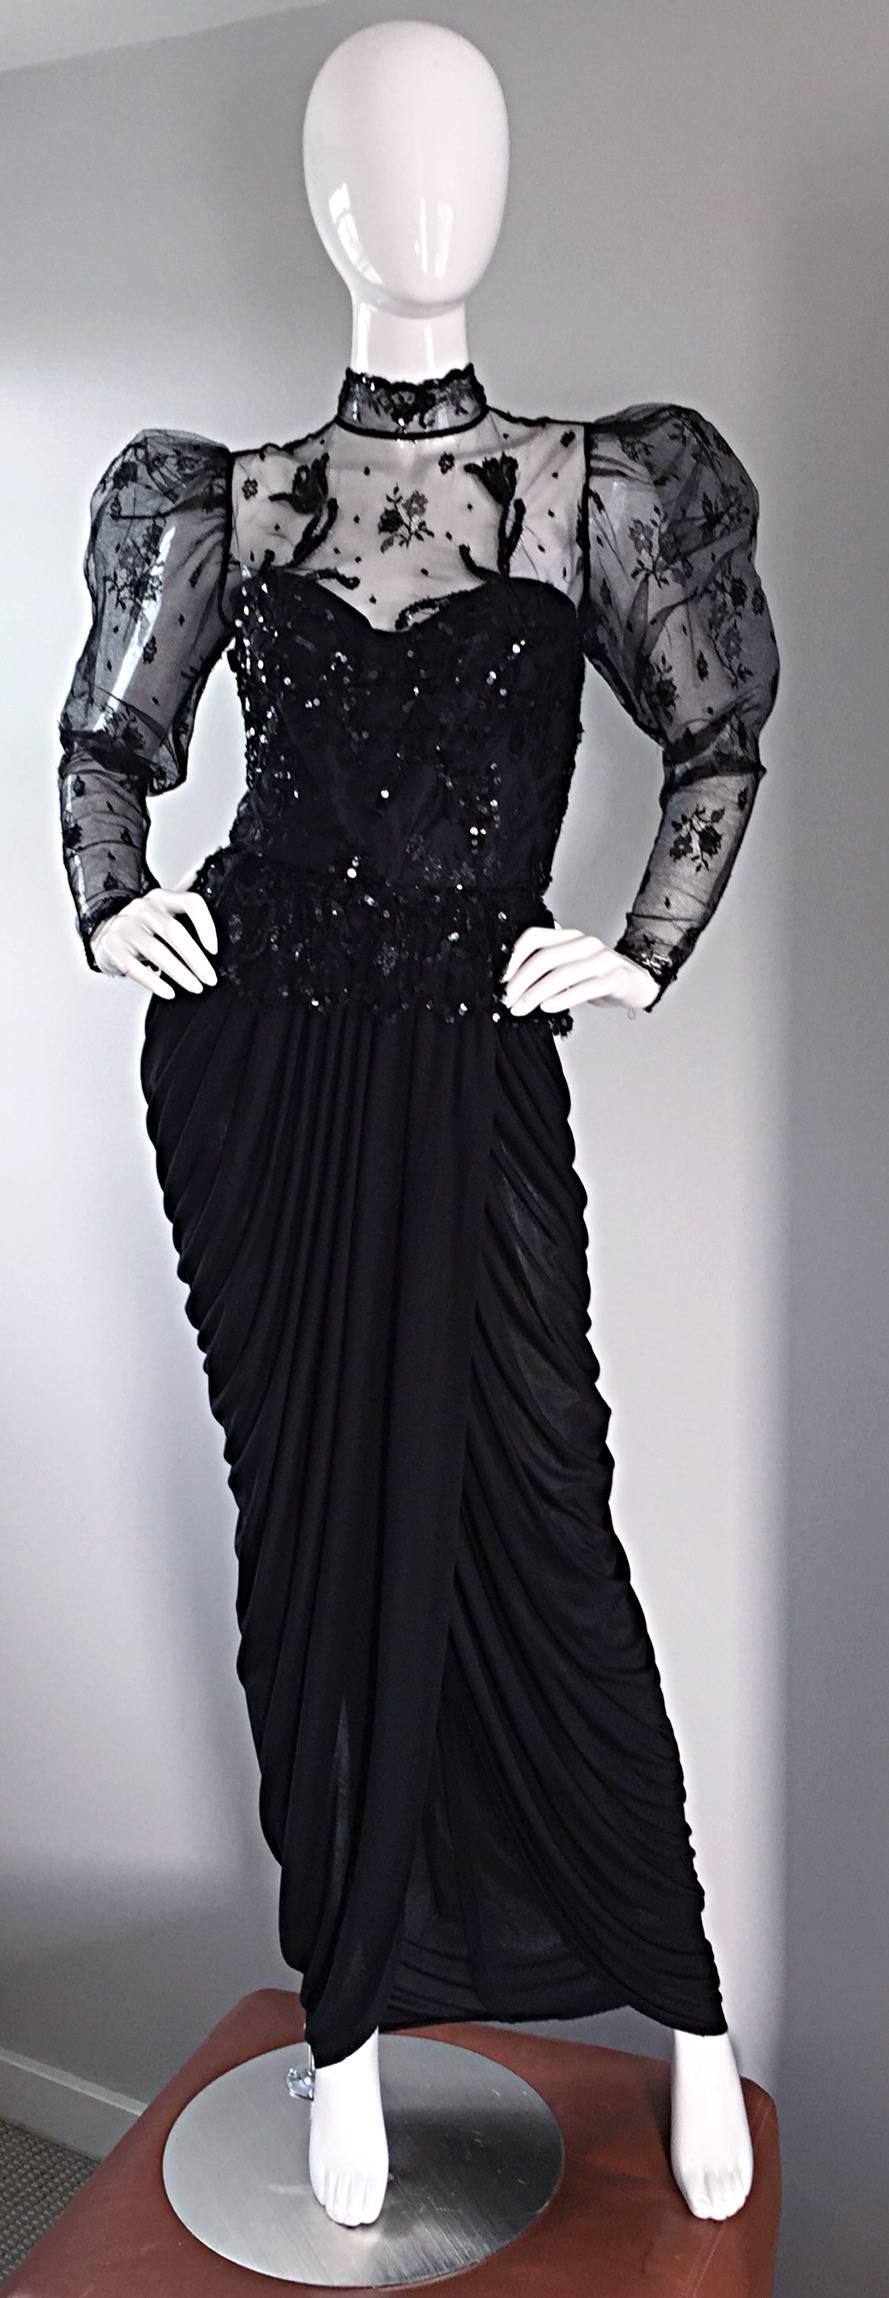 Sensational vintage 1980s / 80s Vicky Tiel black jersey dress! Grecian styled silk jersey skirt, with a Victorian style French lace bodice, which adorned with hundreds of black sequins and beads. Demi Couture quality, with hand-finished sewing. Chic